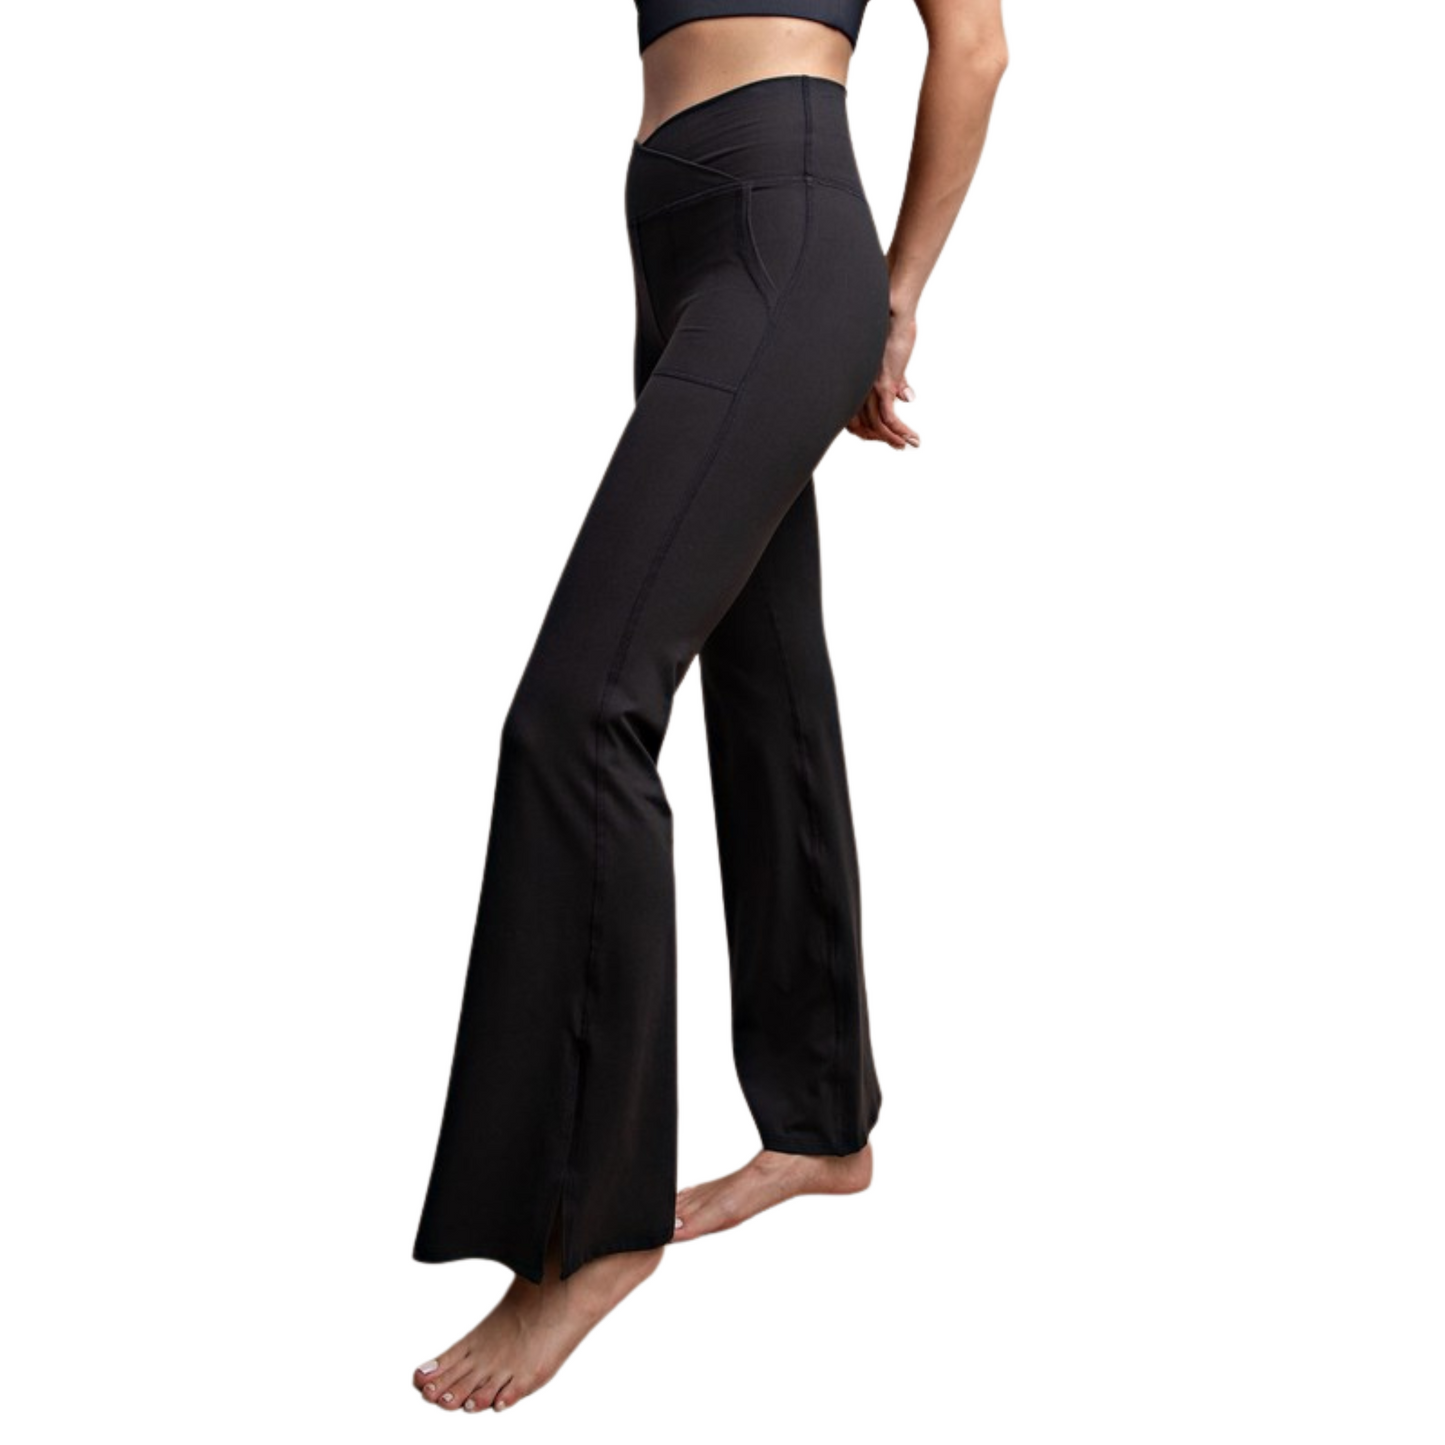 These black, full length butter yoga pants are designed for women and provide a buttery soft feel. The V waist and flared bell bottoms offer extra comfort and style, while the pockets provide convenience. Perfect for any yoga class or casual wear.